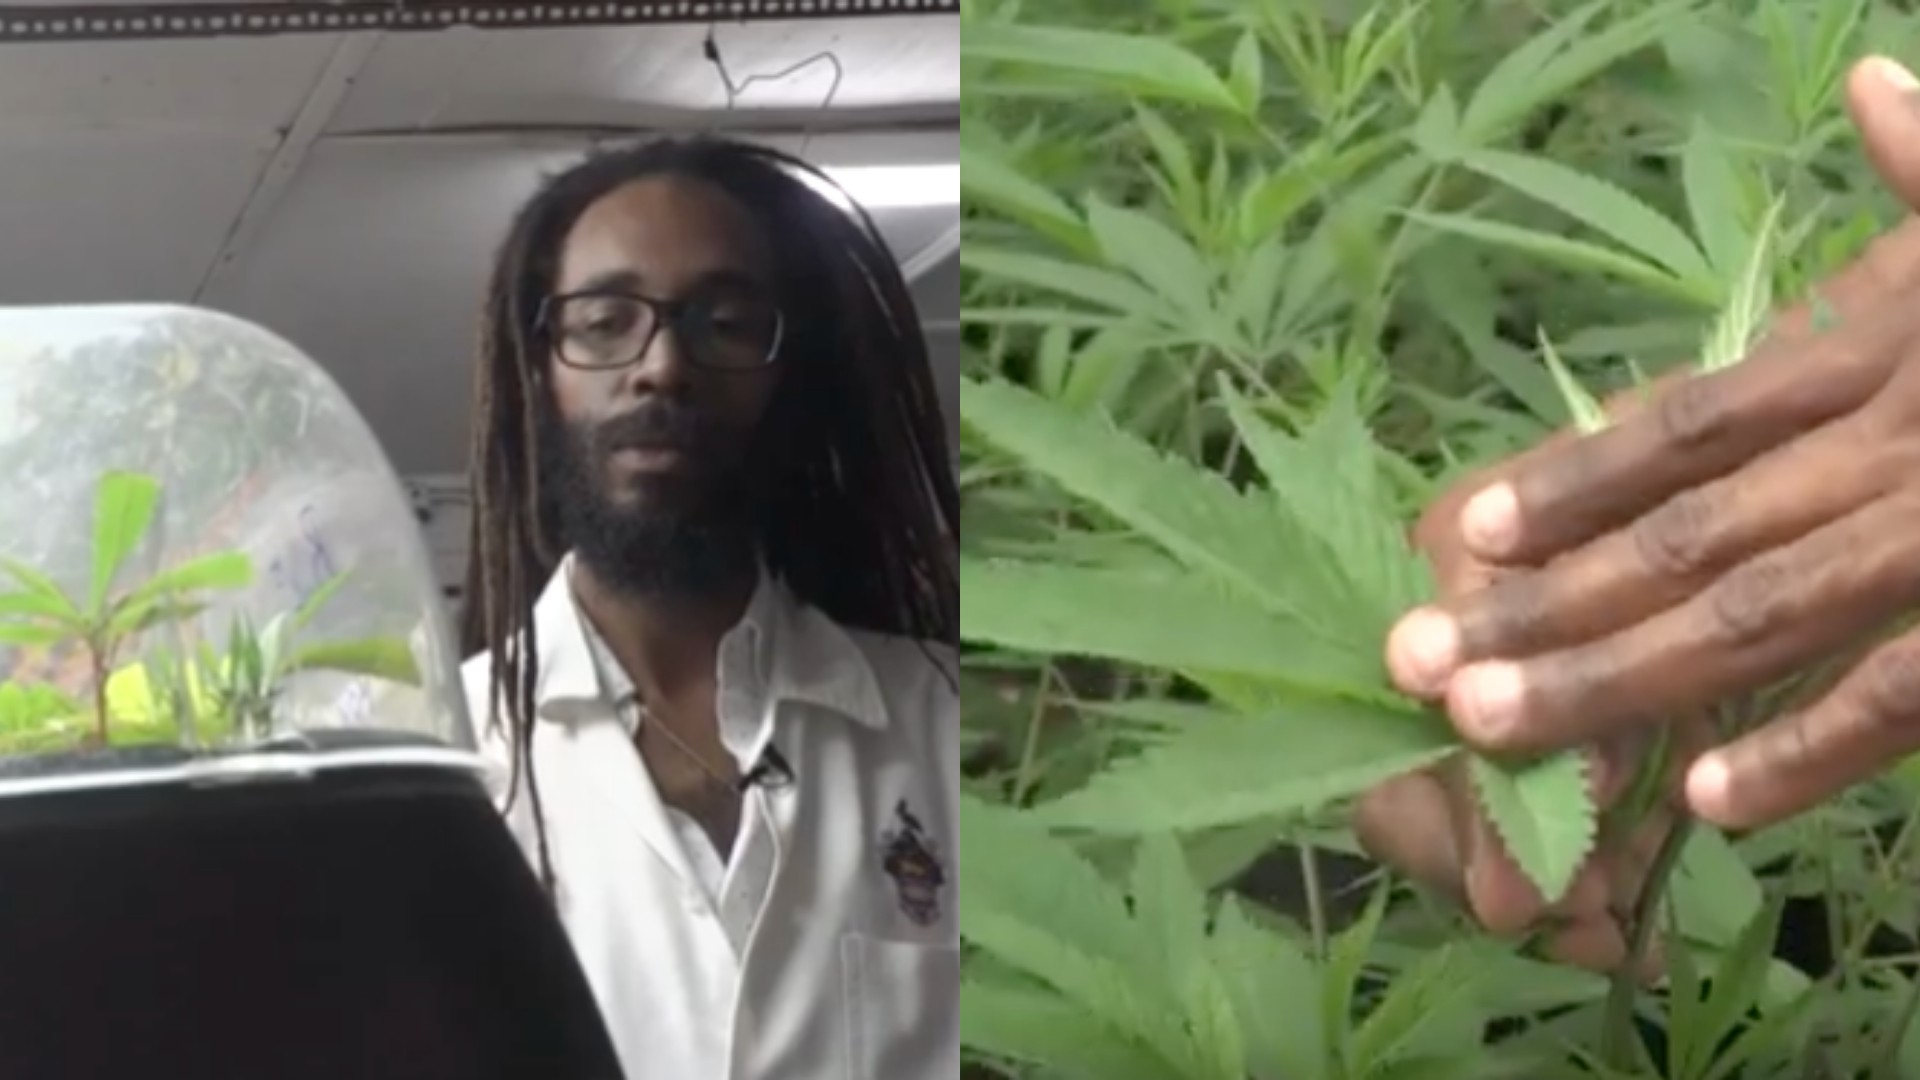 A Jamaican Scientist Is Growing The Supreme Ganja That Bob Marley Used To Smoke